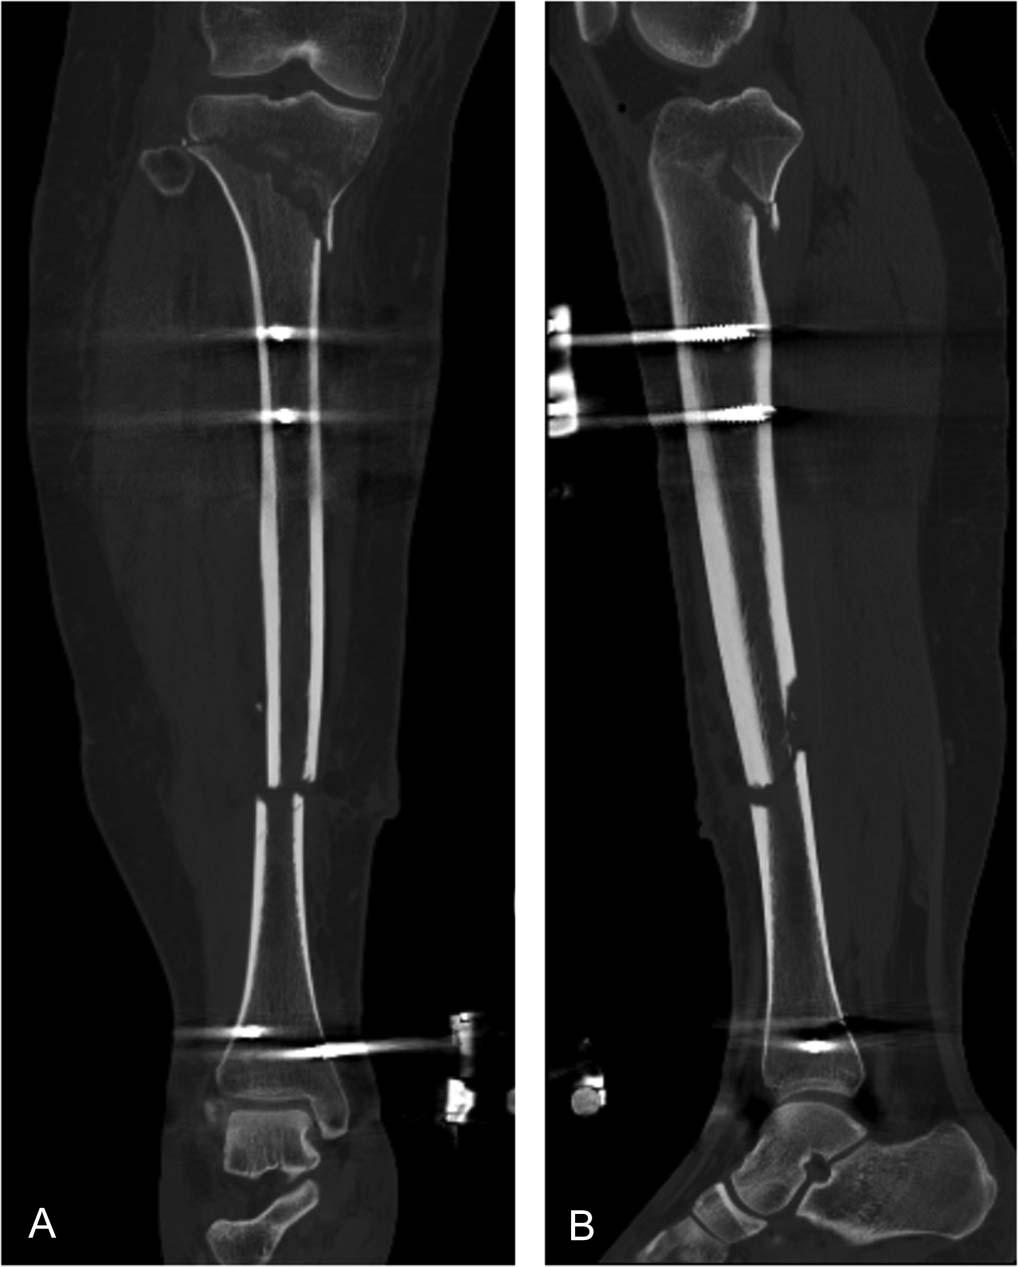 injury. During the same procedure, a hexapod external fixator was placed, and the diaphyseal fracture bone ends were acutely shortened and compressed, whichassistedwiththewoundclosure.